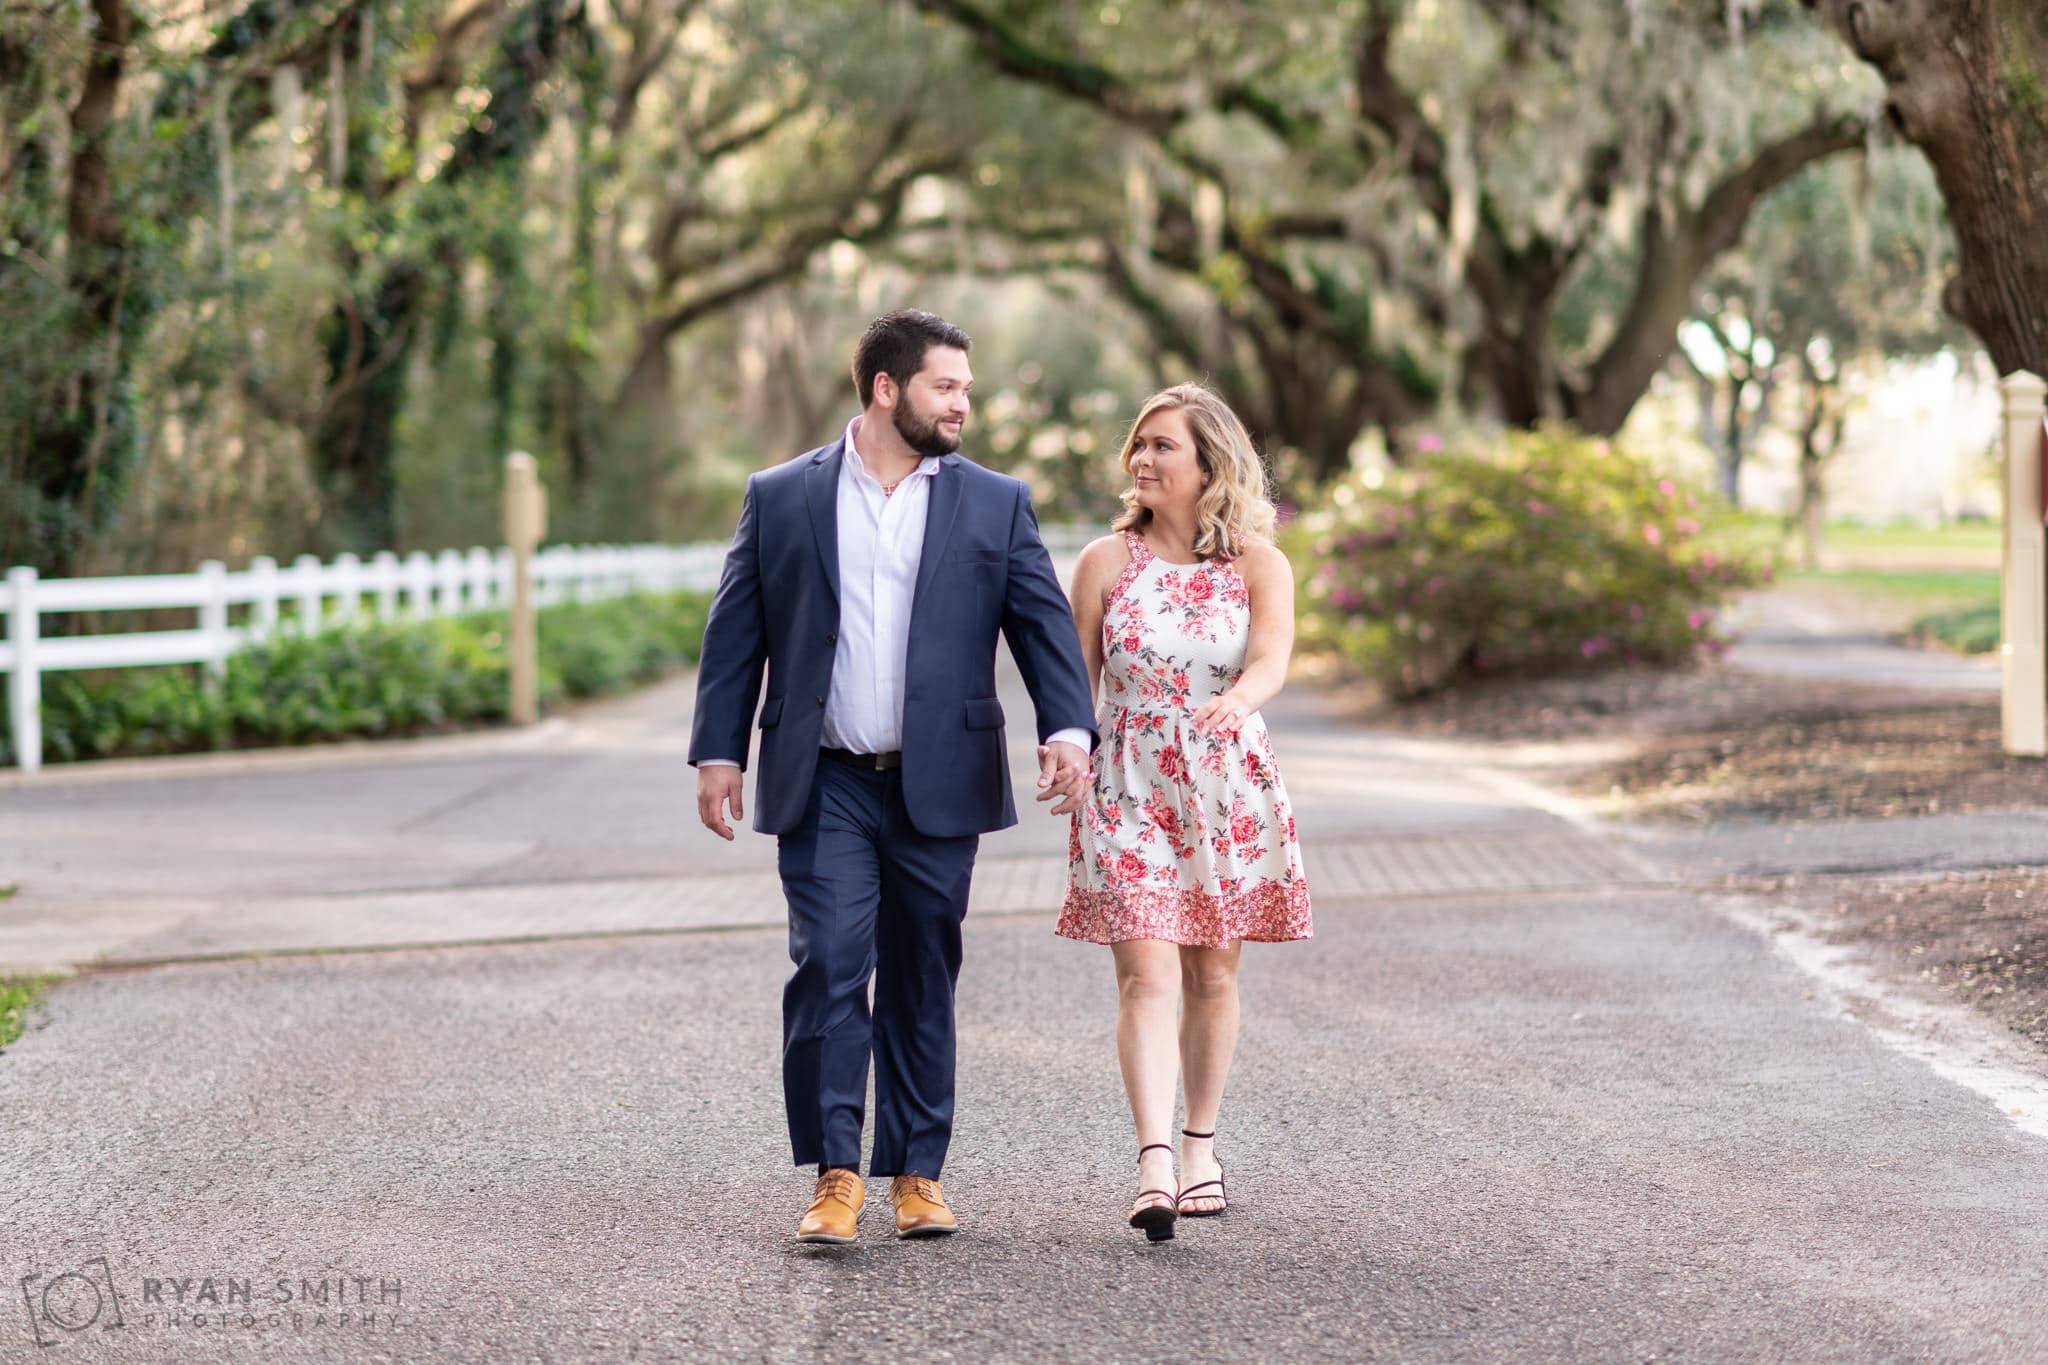 Holding hands walking under the live oaks - Caledonia Golf & Fish Club